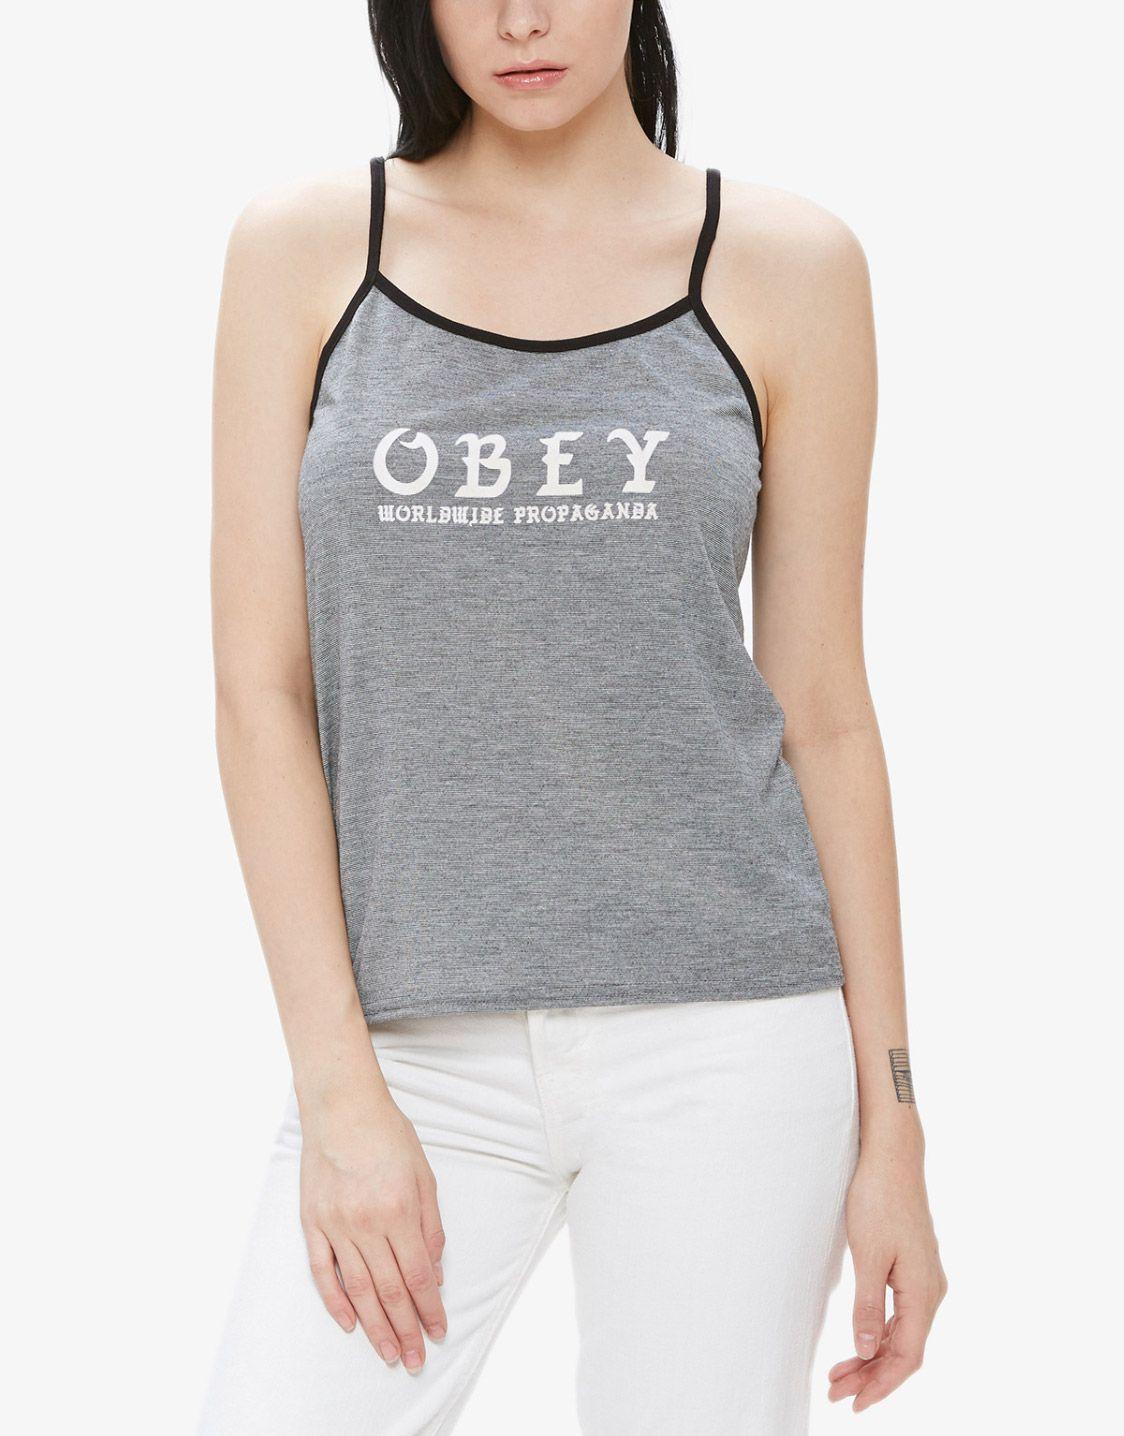 OBEY Clothing Old Logo - OBEY Clothing Old world tank top OBEY Women